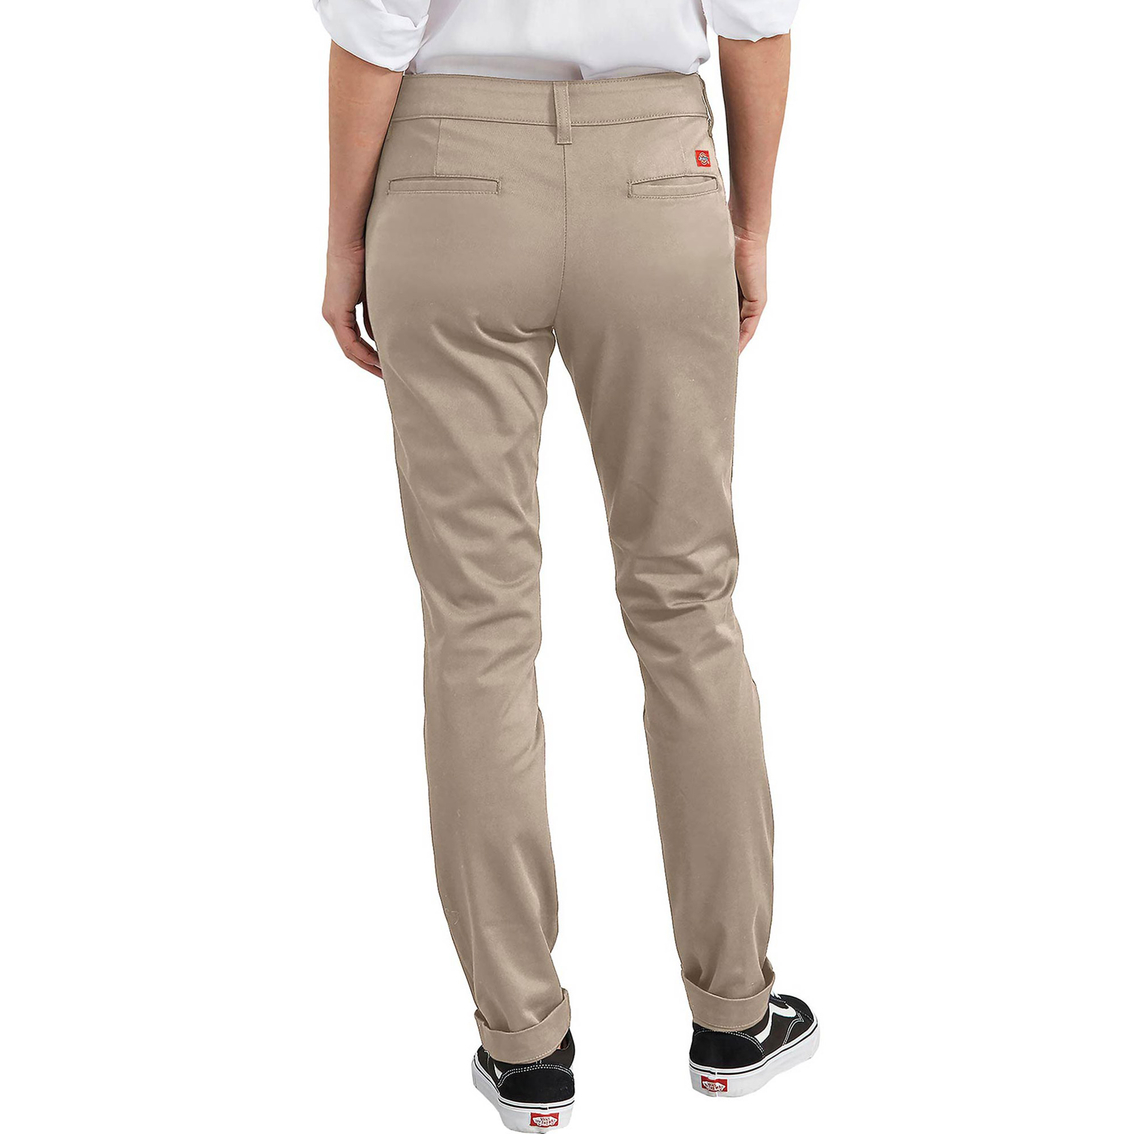 Dickies Stretch Twill Pants - Image 2 of 2